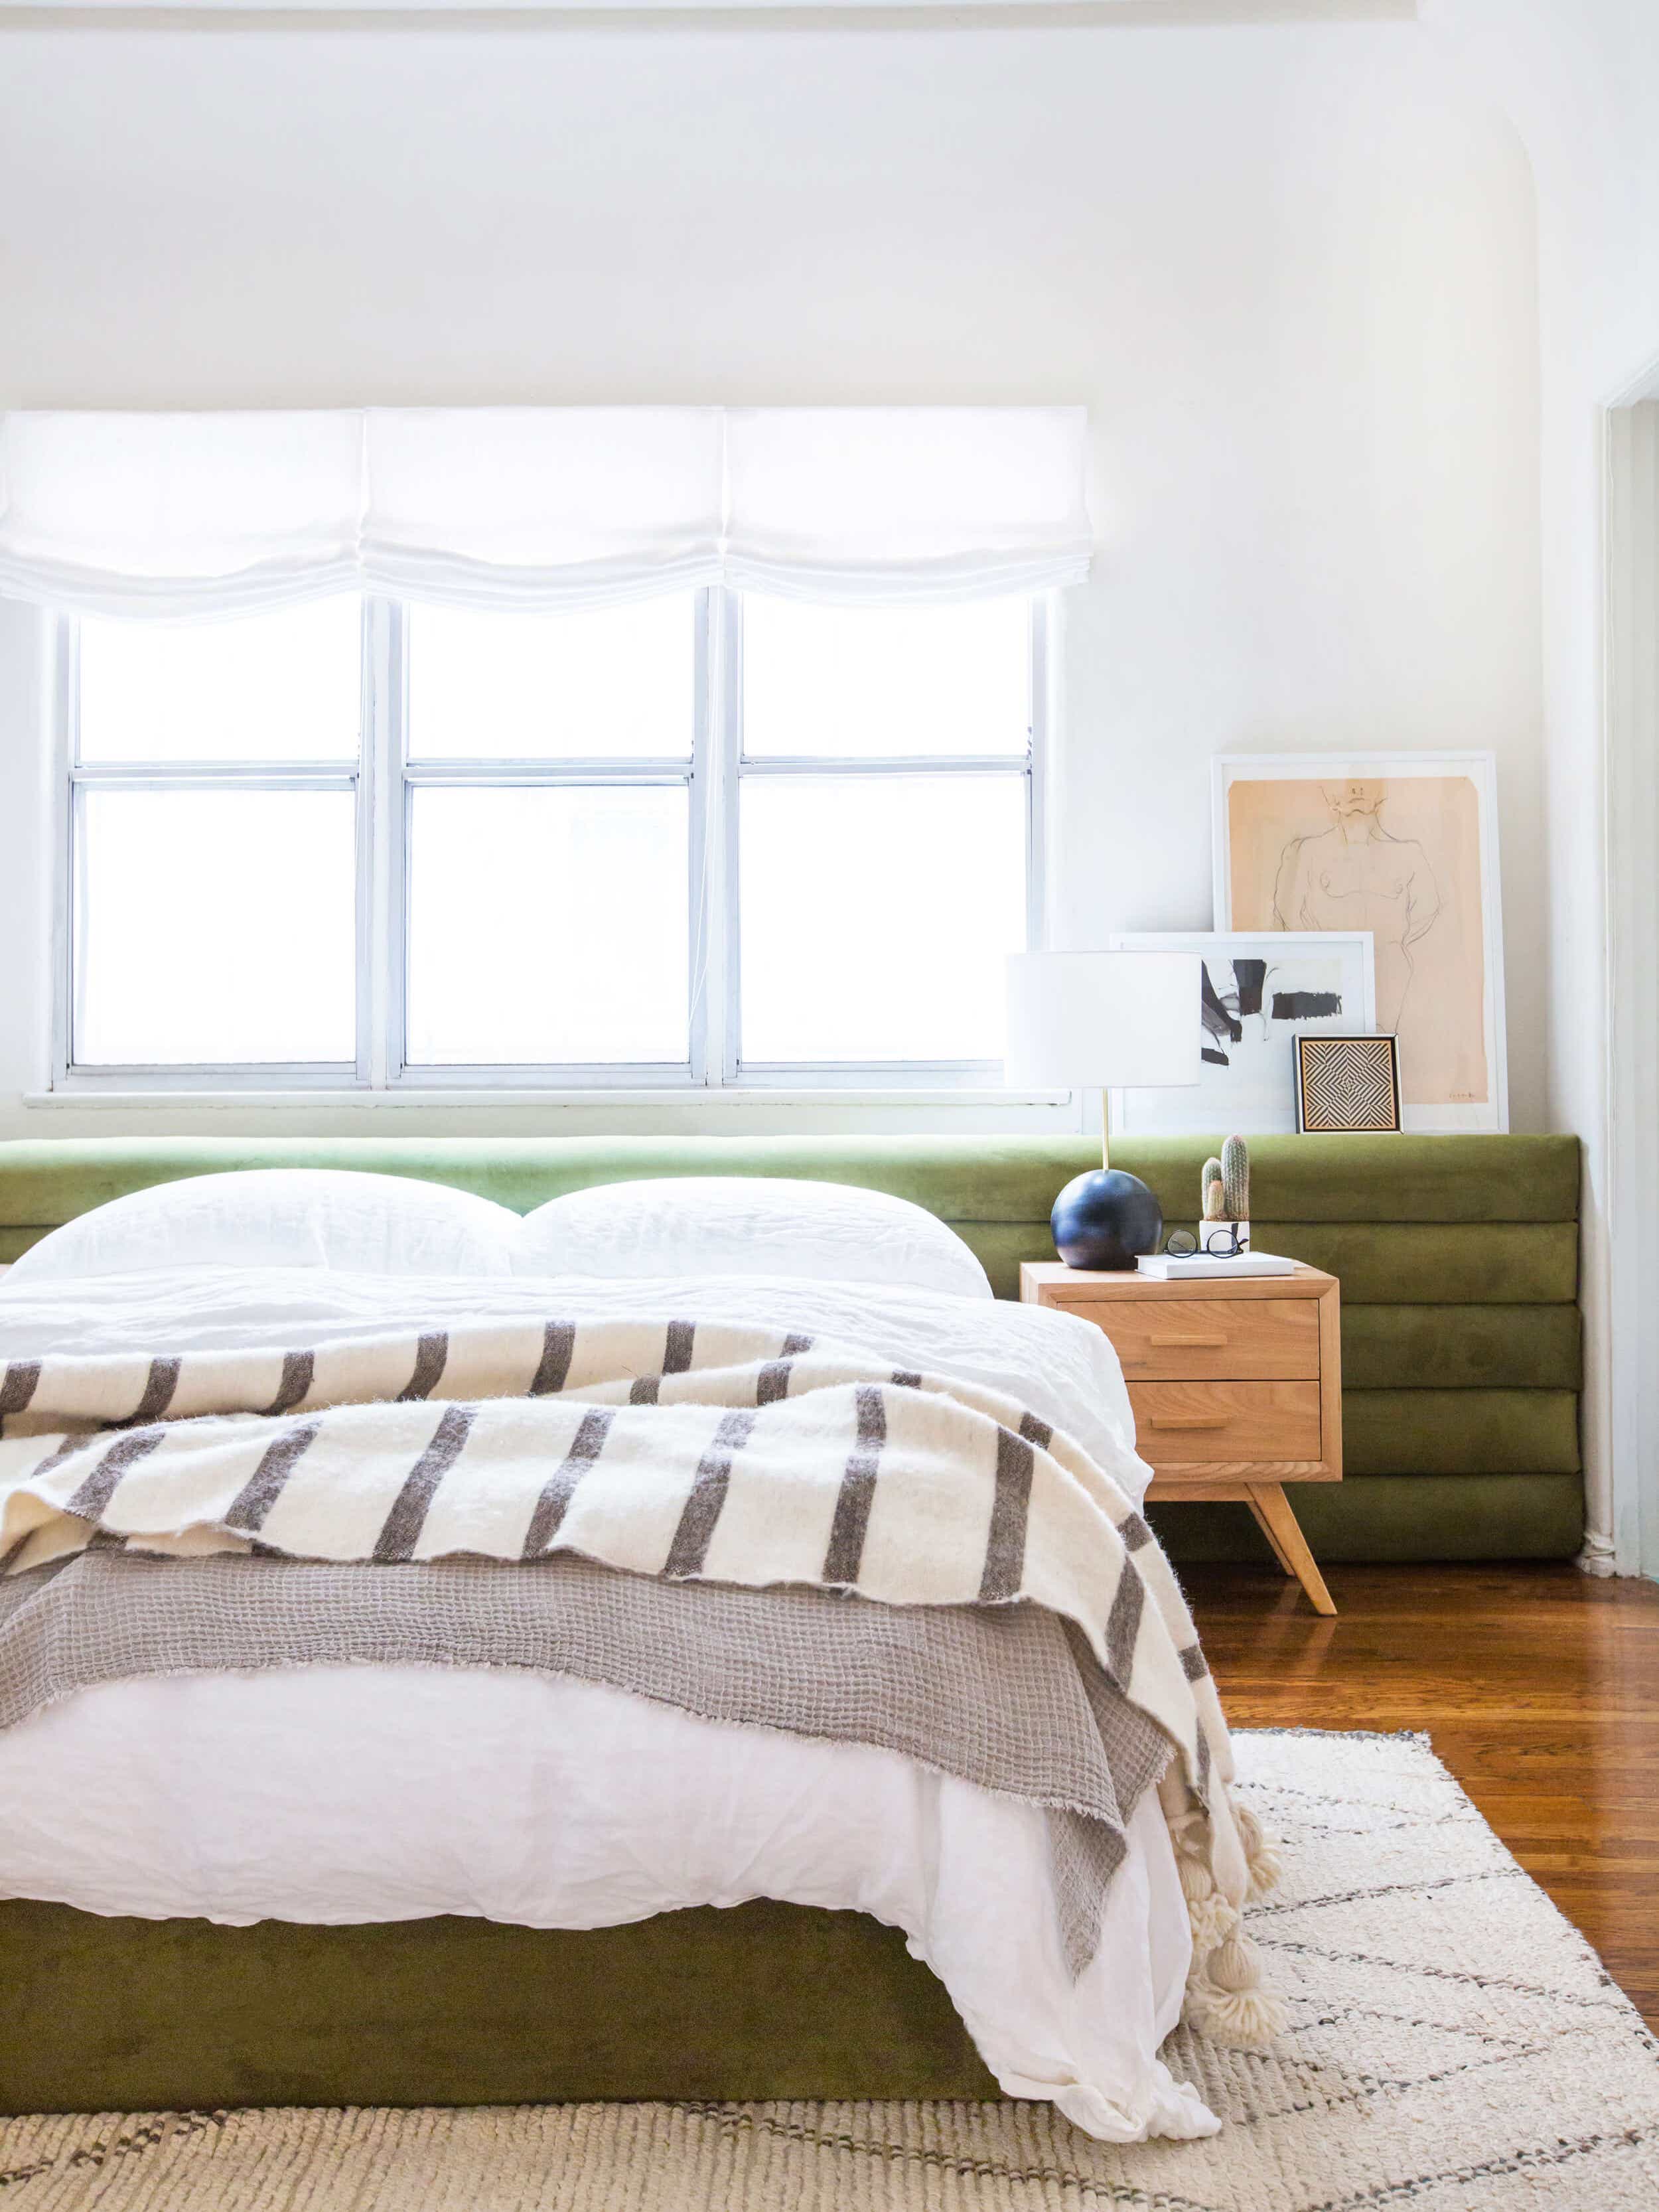 Channel-Tufted Headboards Are the Next Big Bedroom Trend You Can DIY